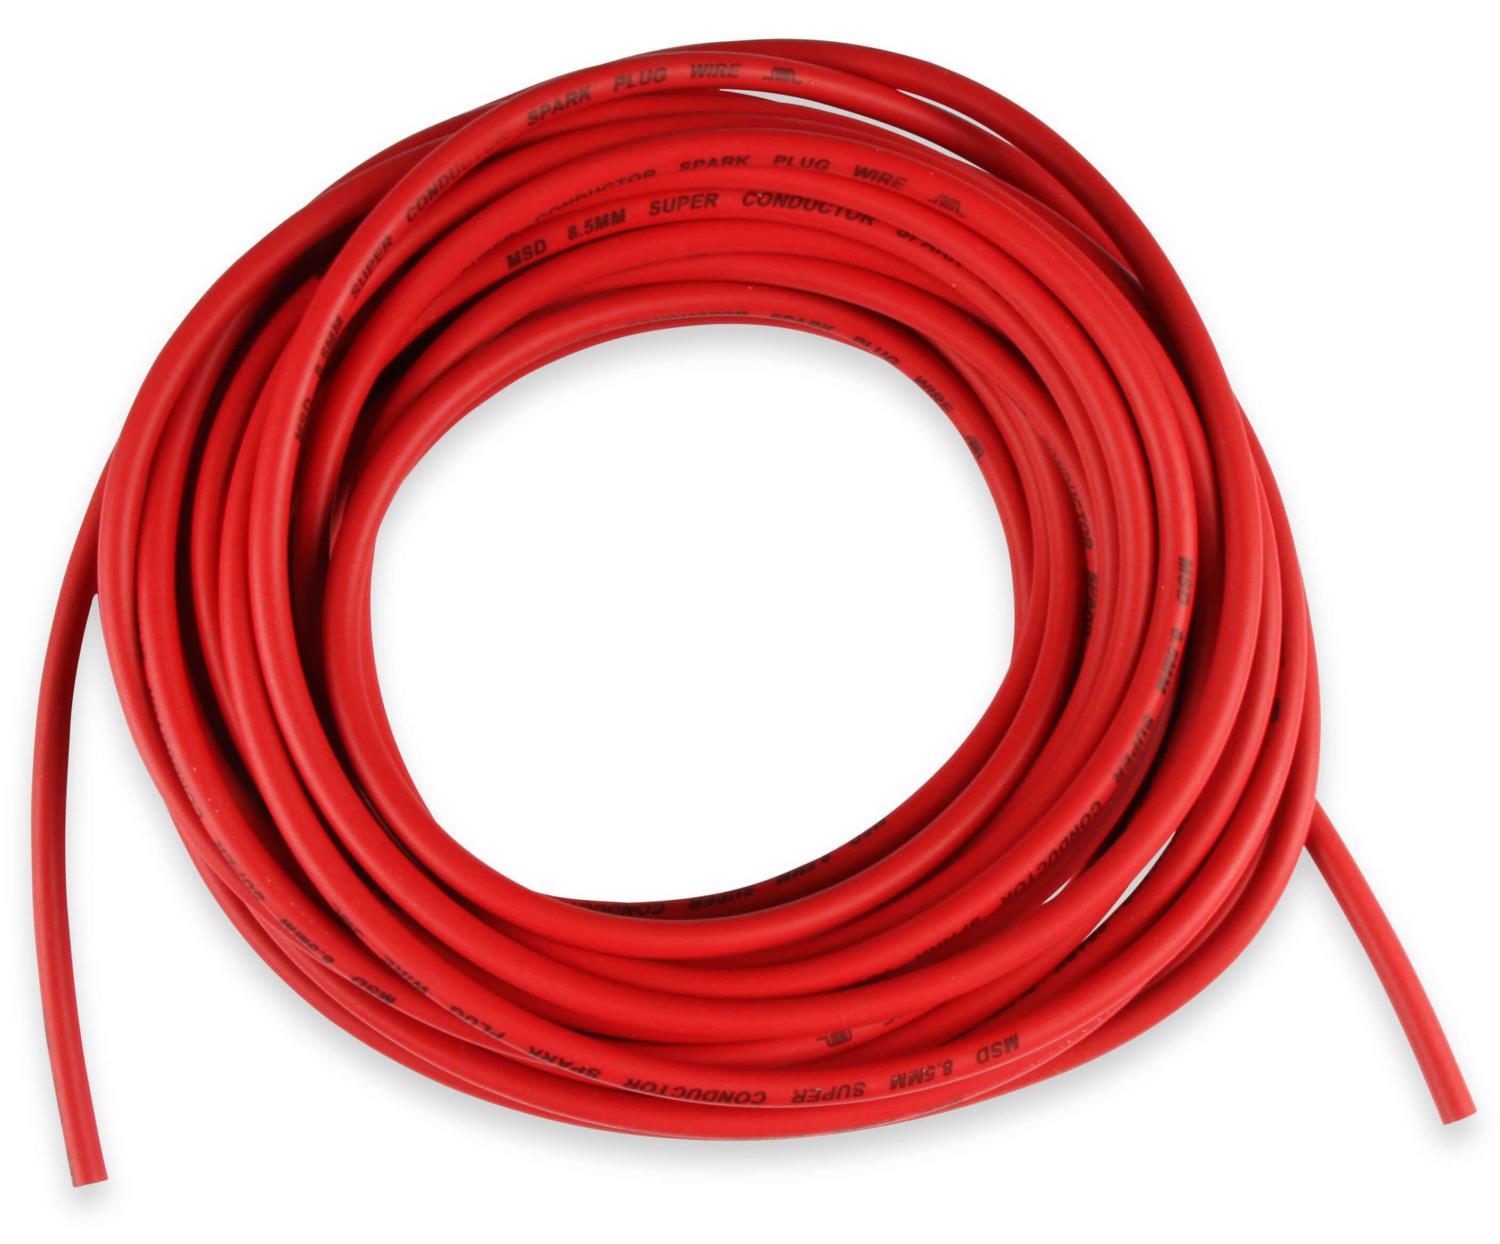 Super Conductor 8.5mm Spark Plug Wire - Red